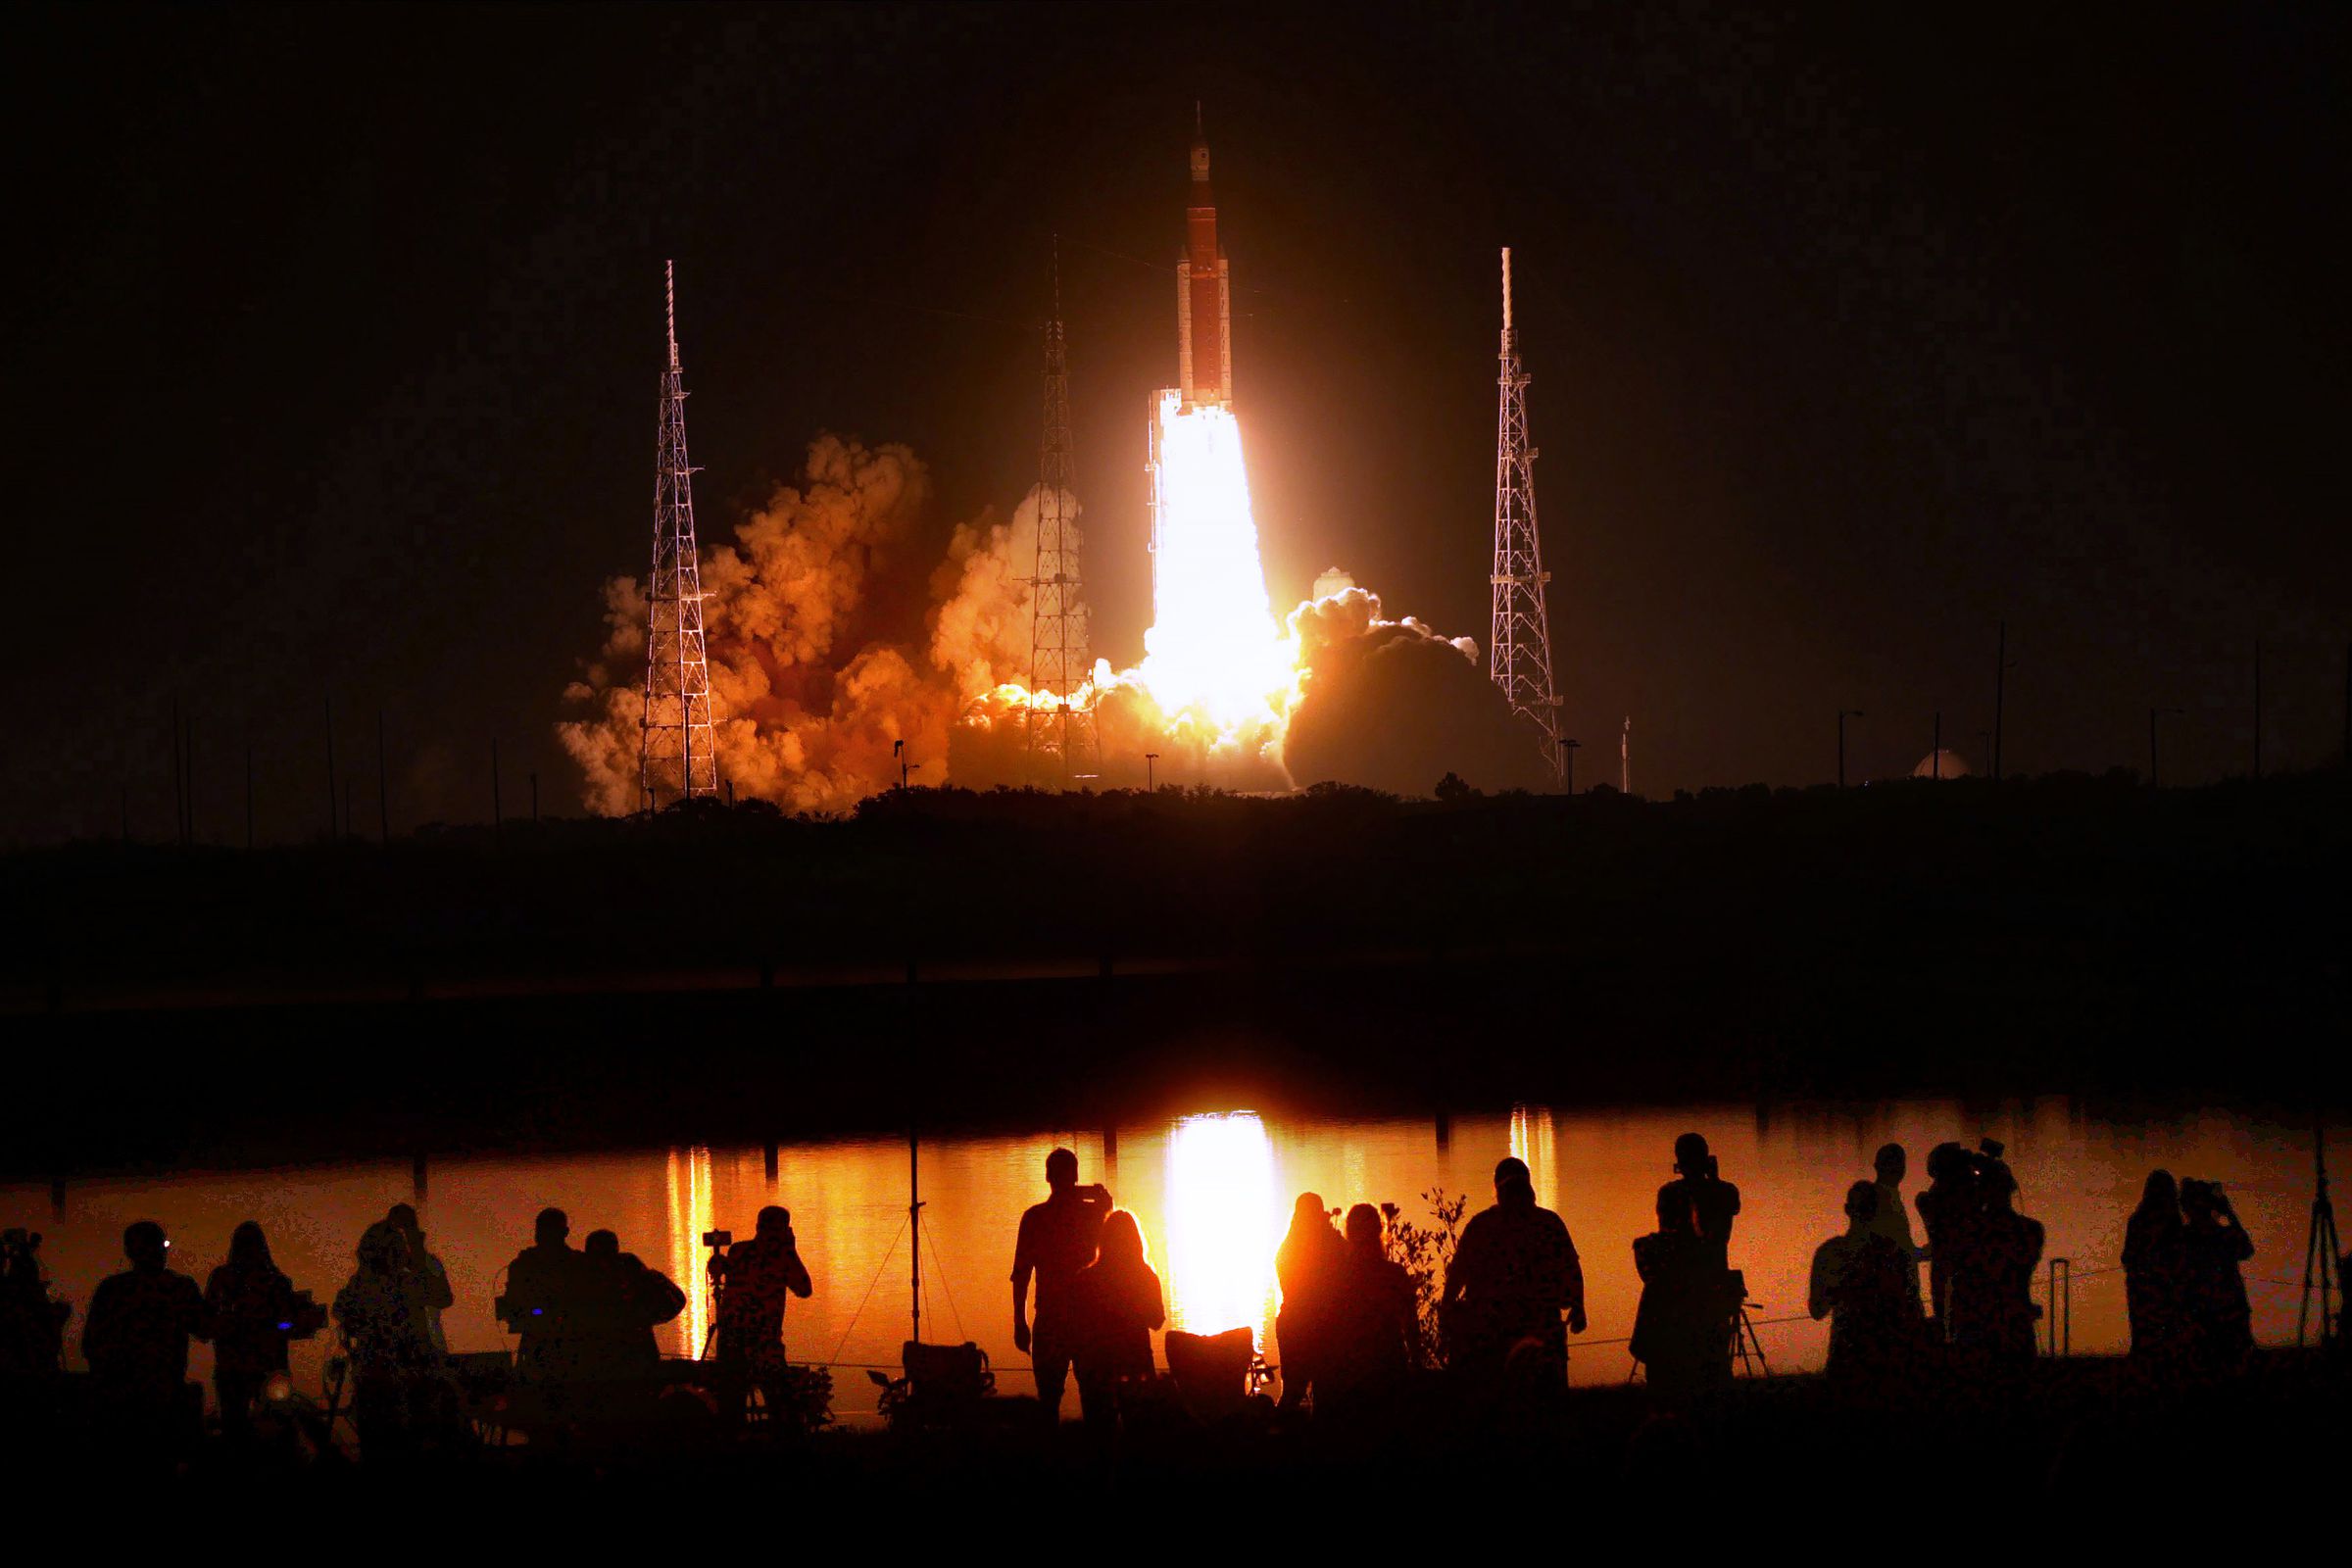 A row of people stand silhouetted against the orange glow of a distant rocket launch.